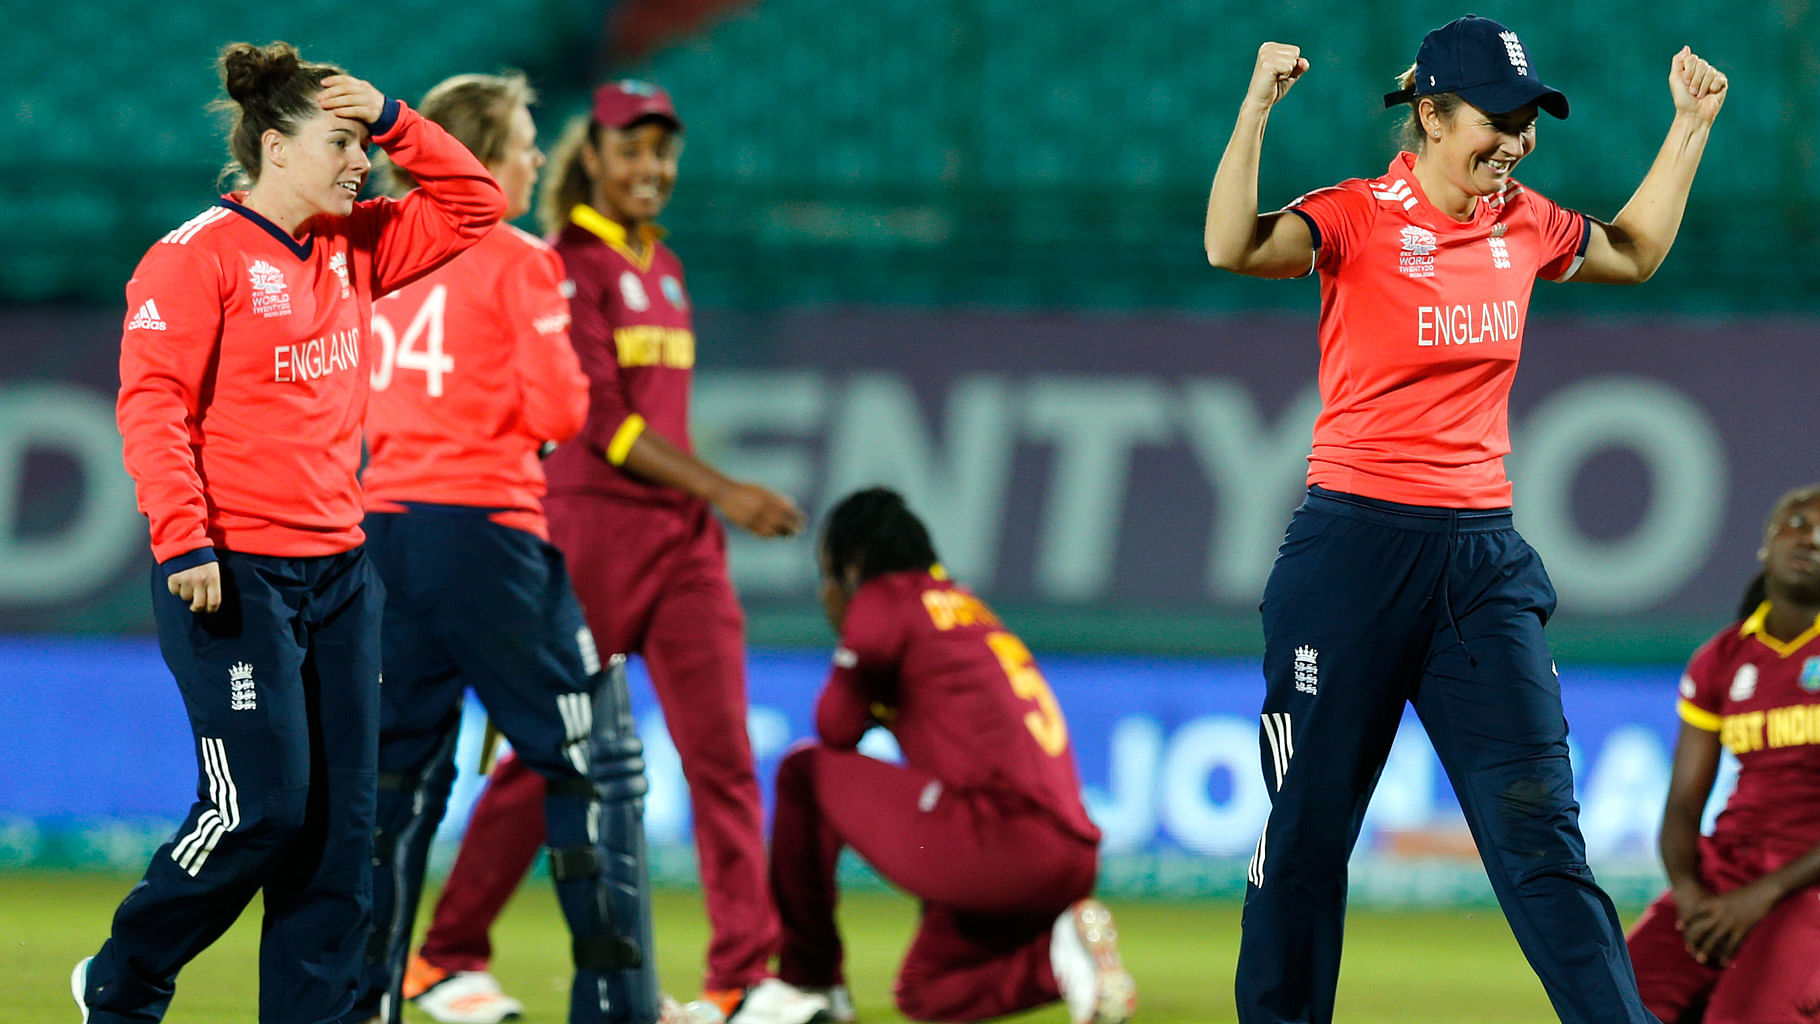  England’s captain  Charlotte Edwards, right, celebrates after winning their match against the West Indies. (Photo: AP)